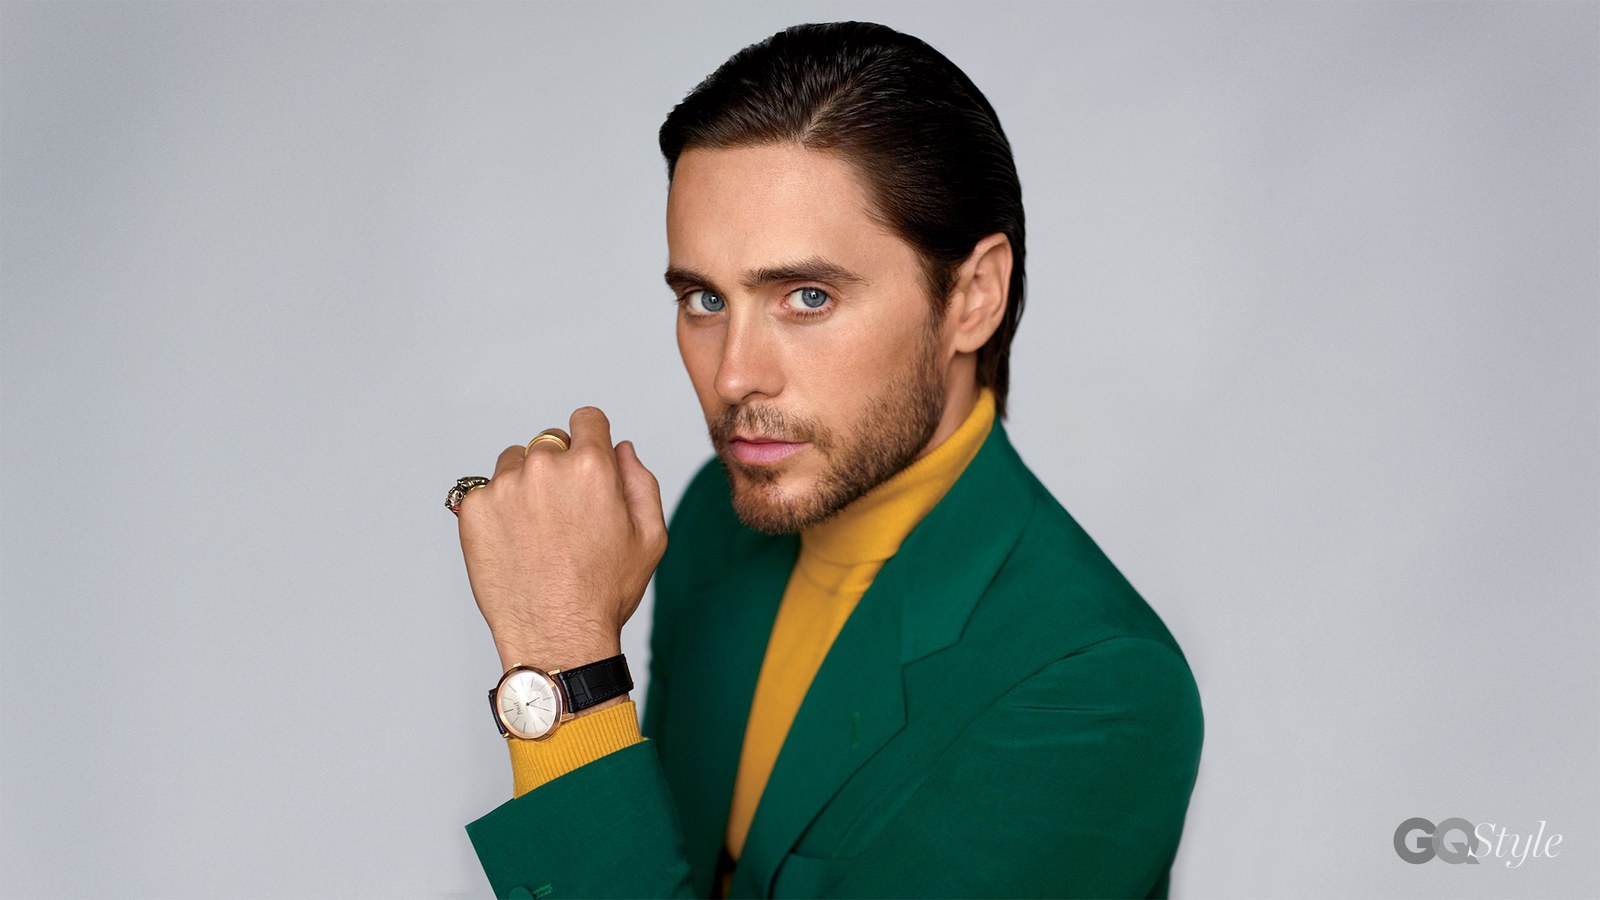 Spotted: Jared Leto in Gucci for GQ Style